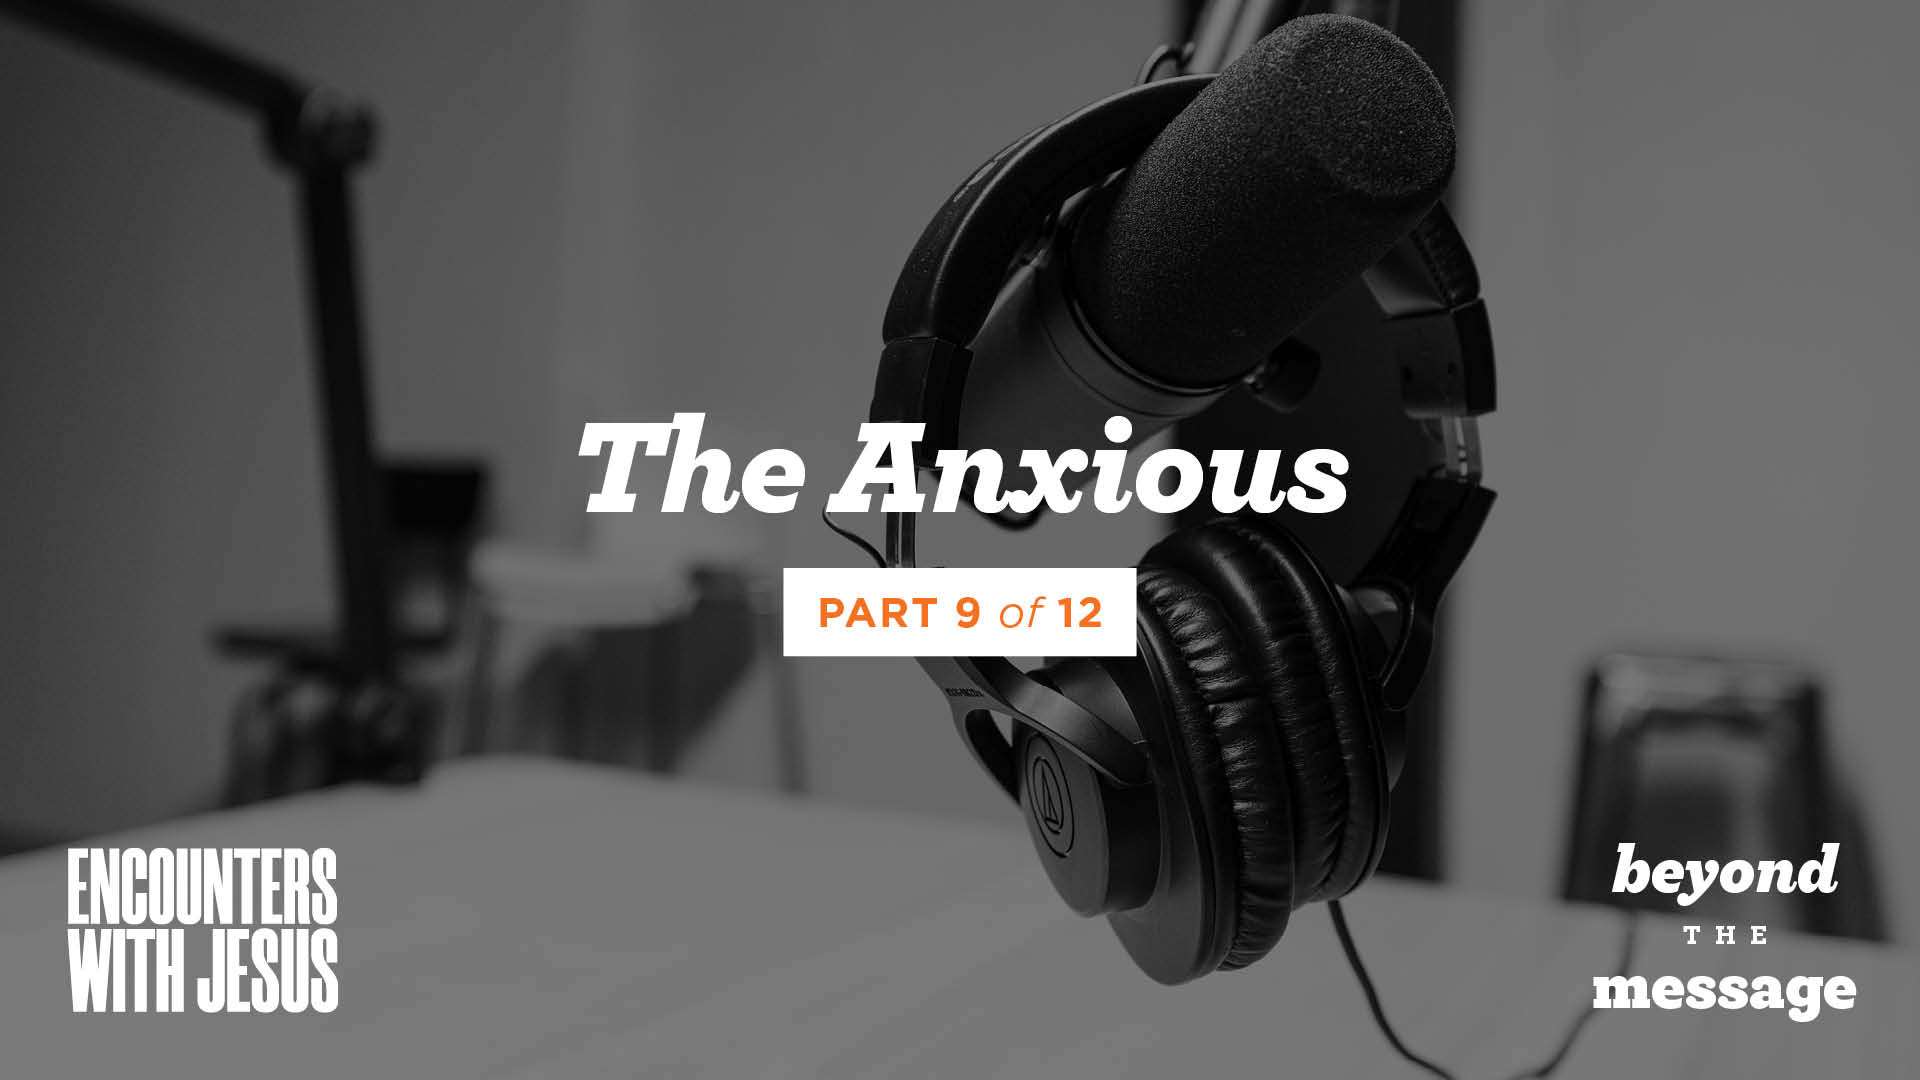 Beyond the Message: Encounters with Jesus: The Anxious